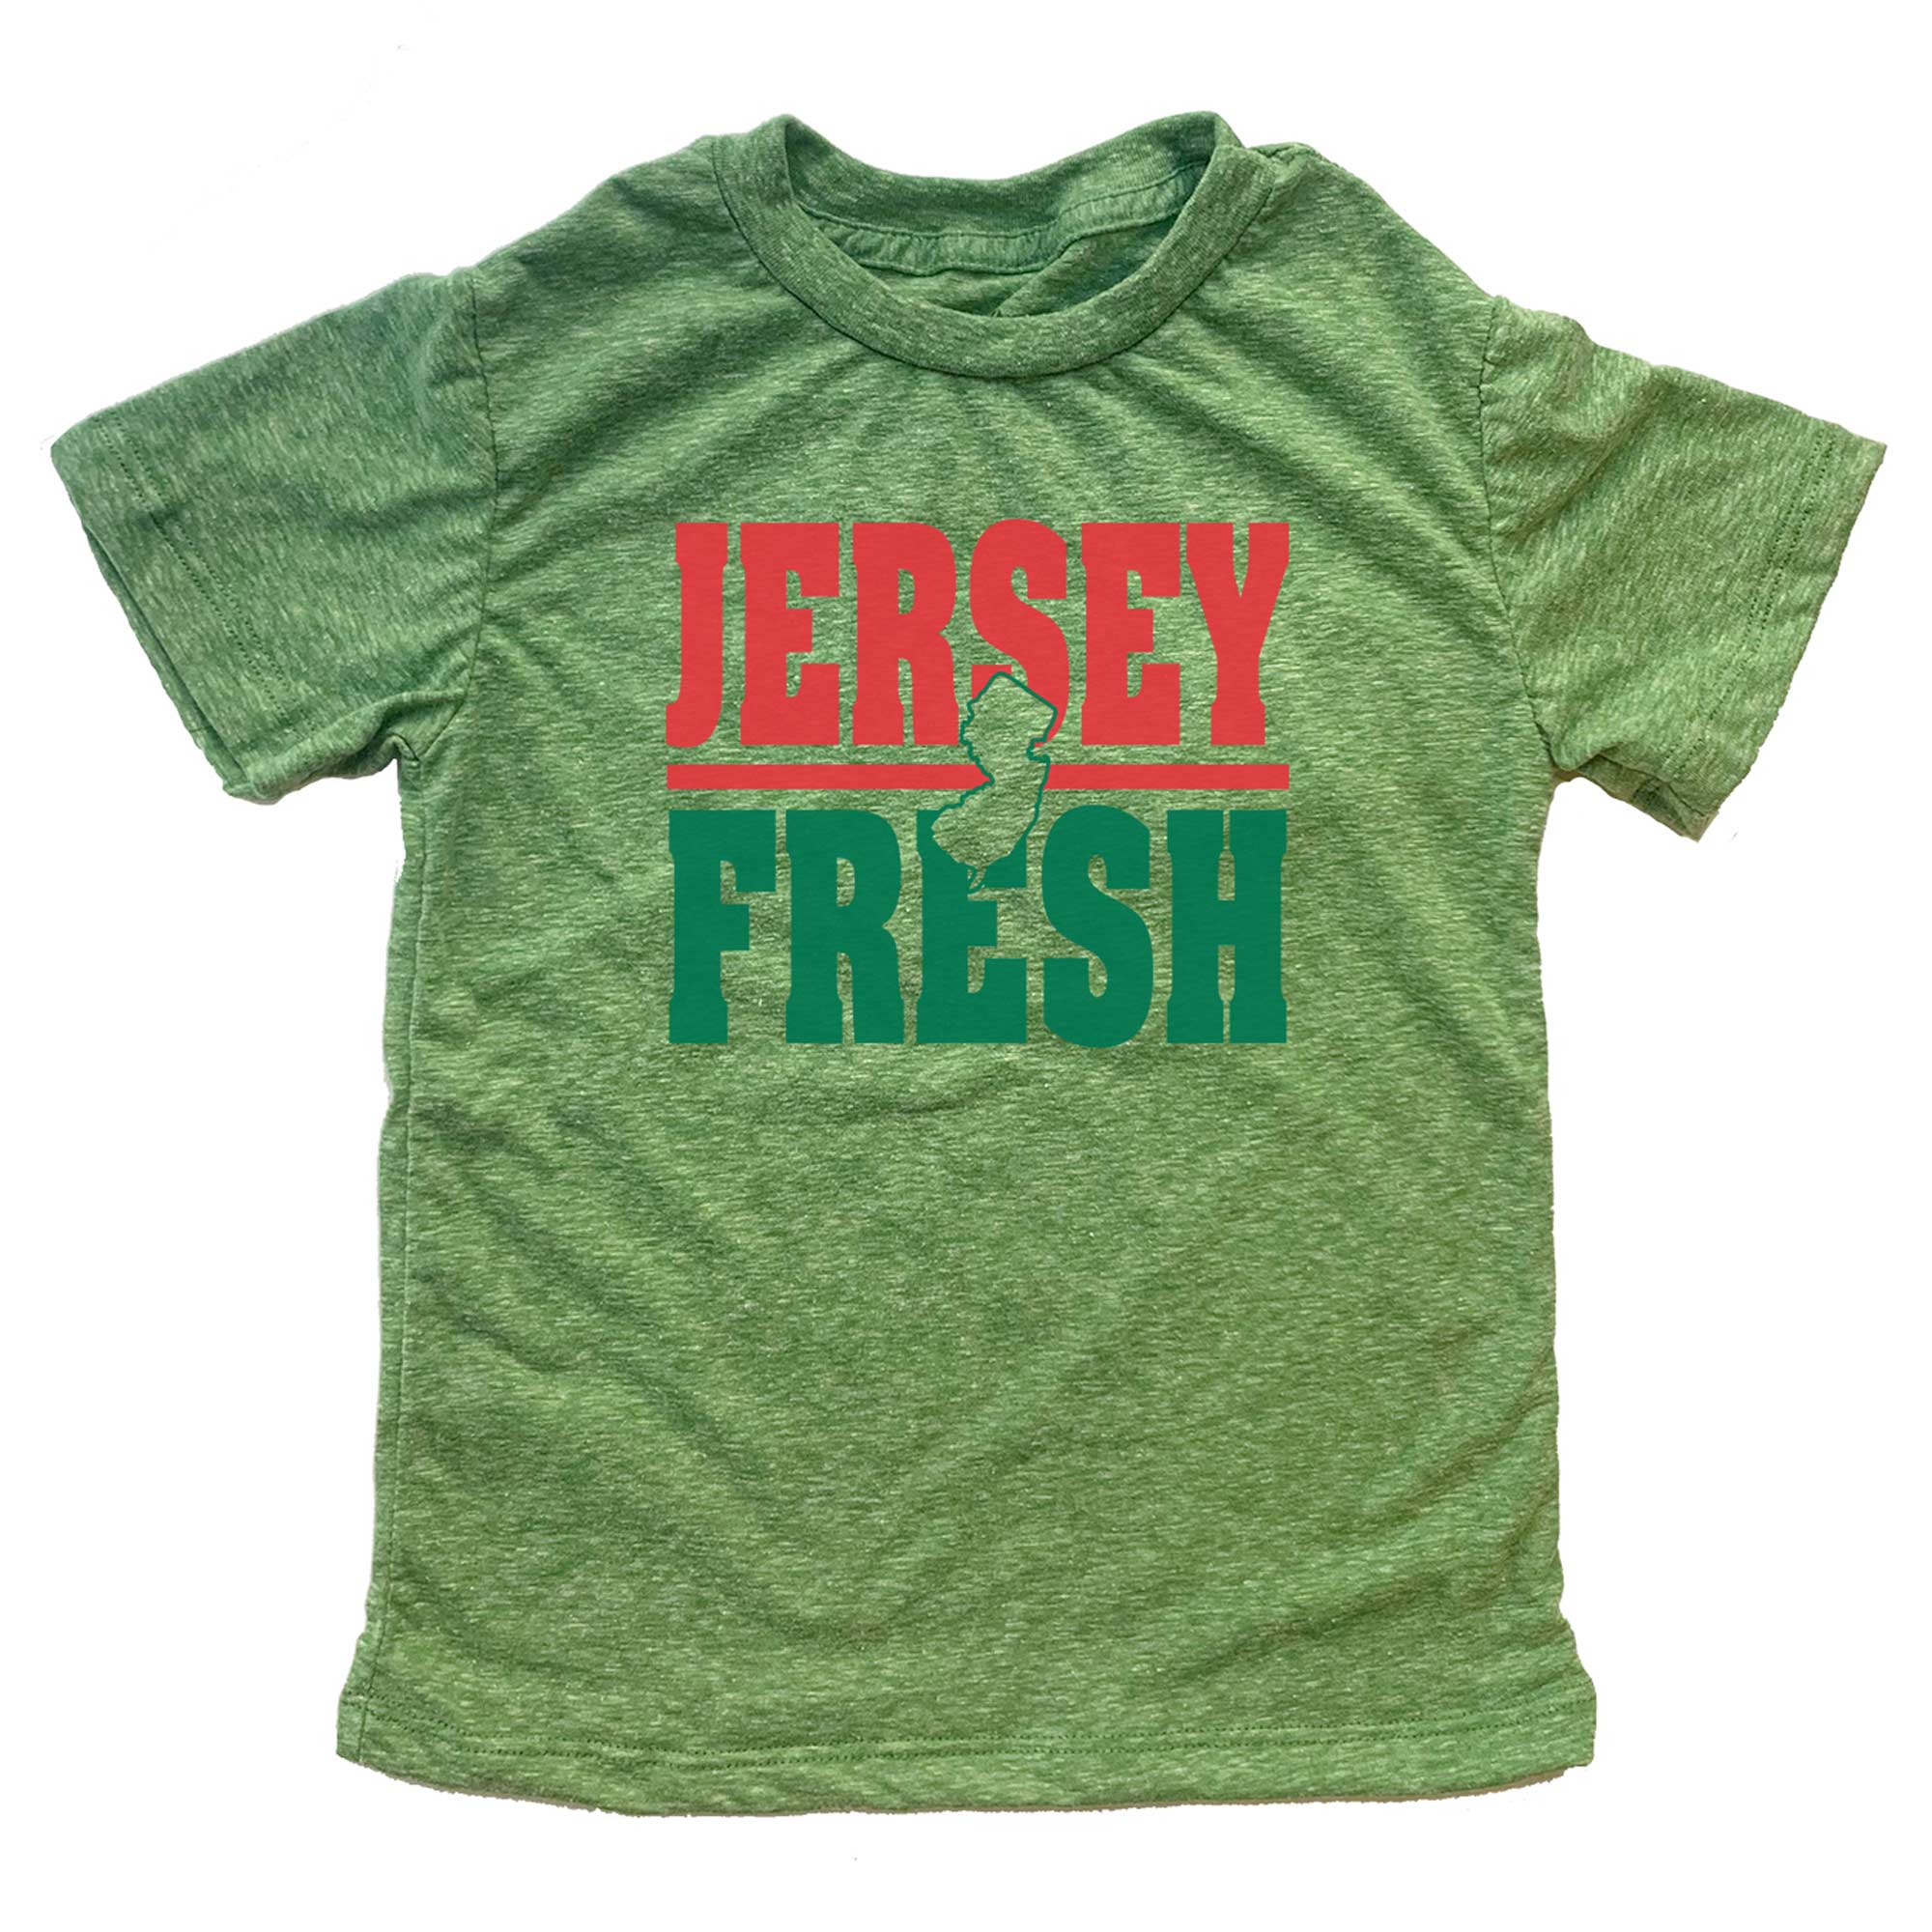 Kids New Jersey Fresh Vintage Graphic T-Shirt | Cute Funny Garden State Kelly Tee | Solid Threads